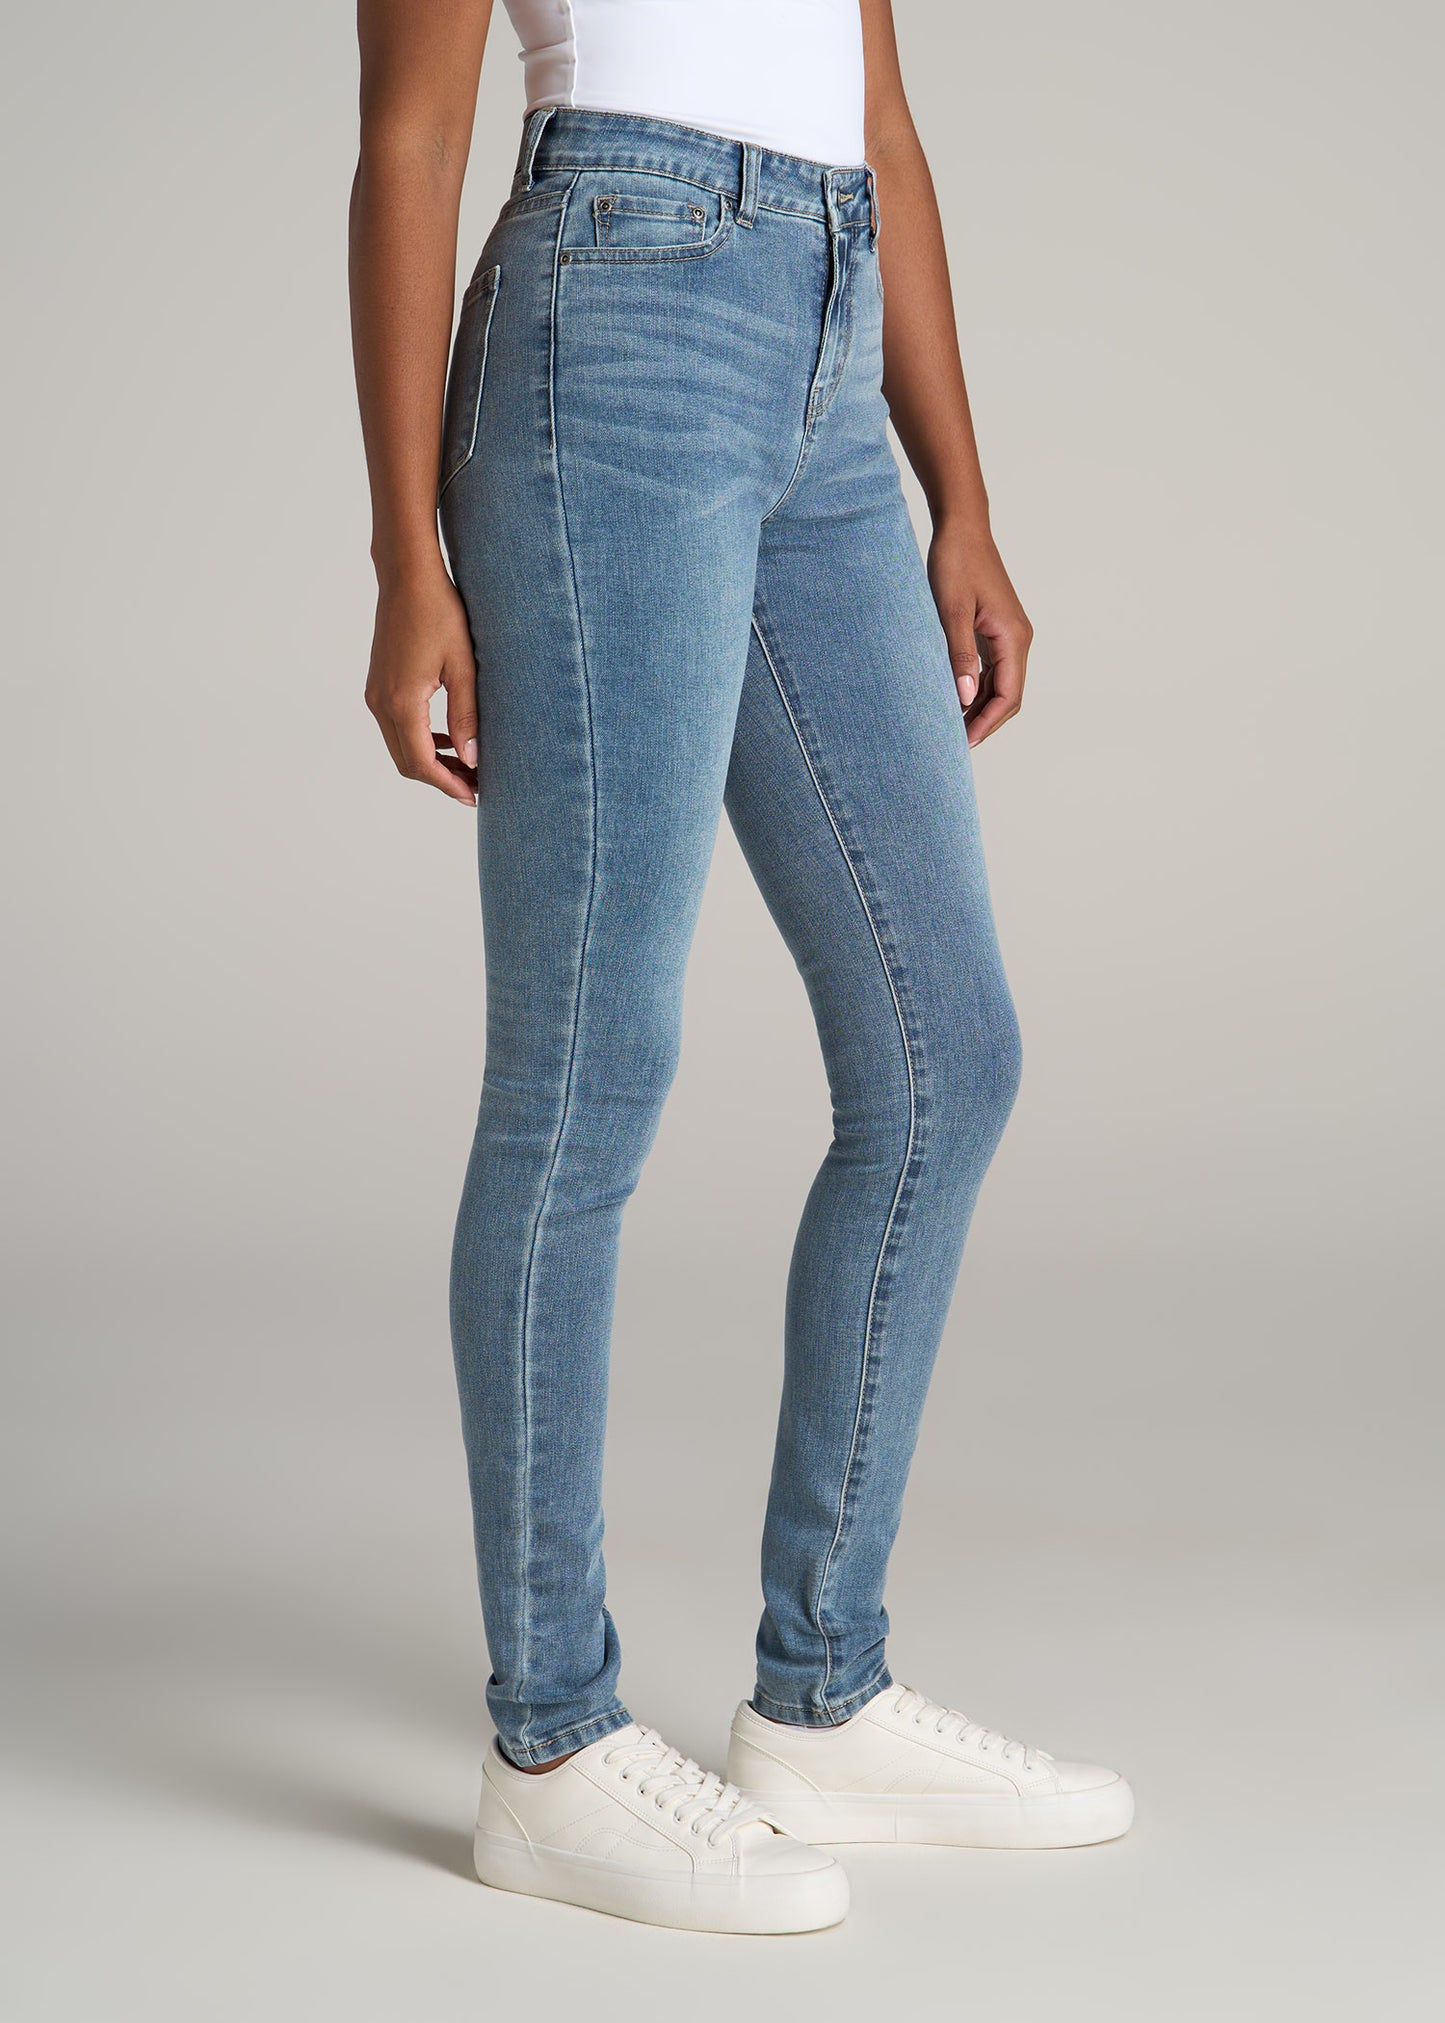 Stop Marketing Super Skinny Jeans to Girls